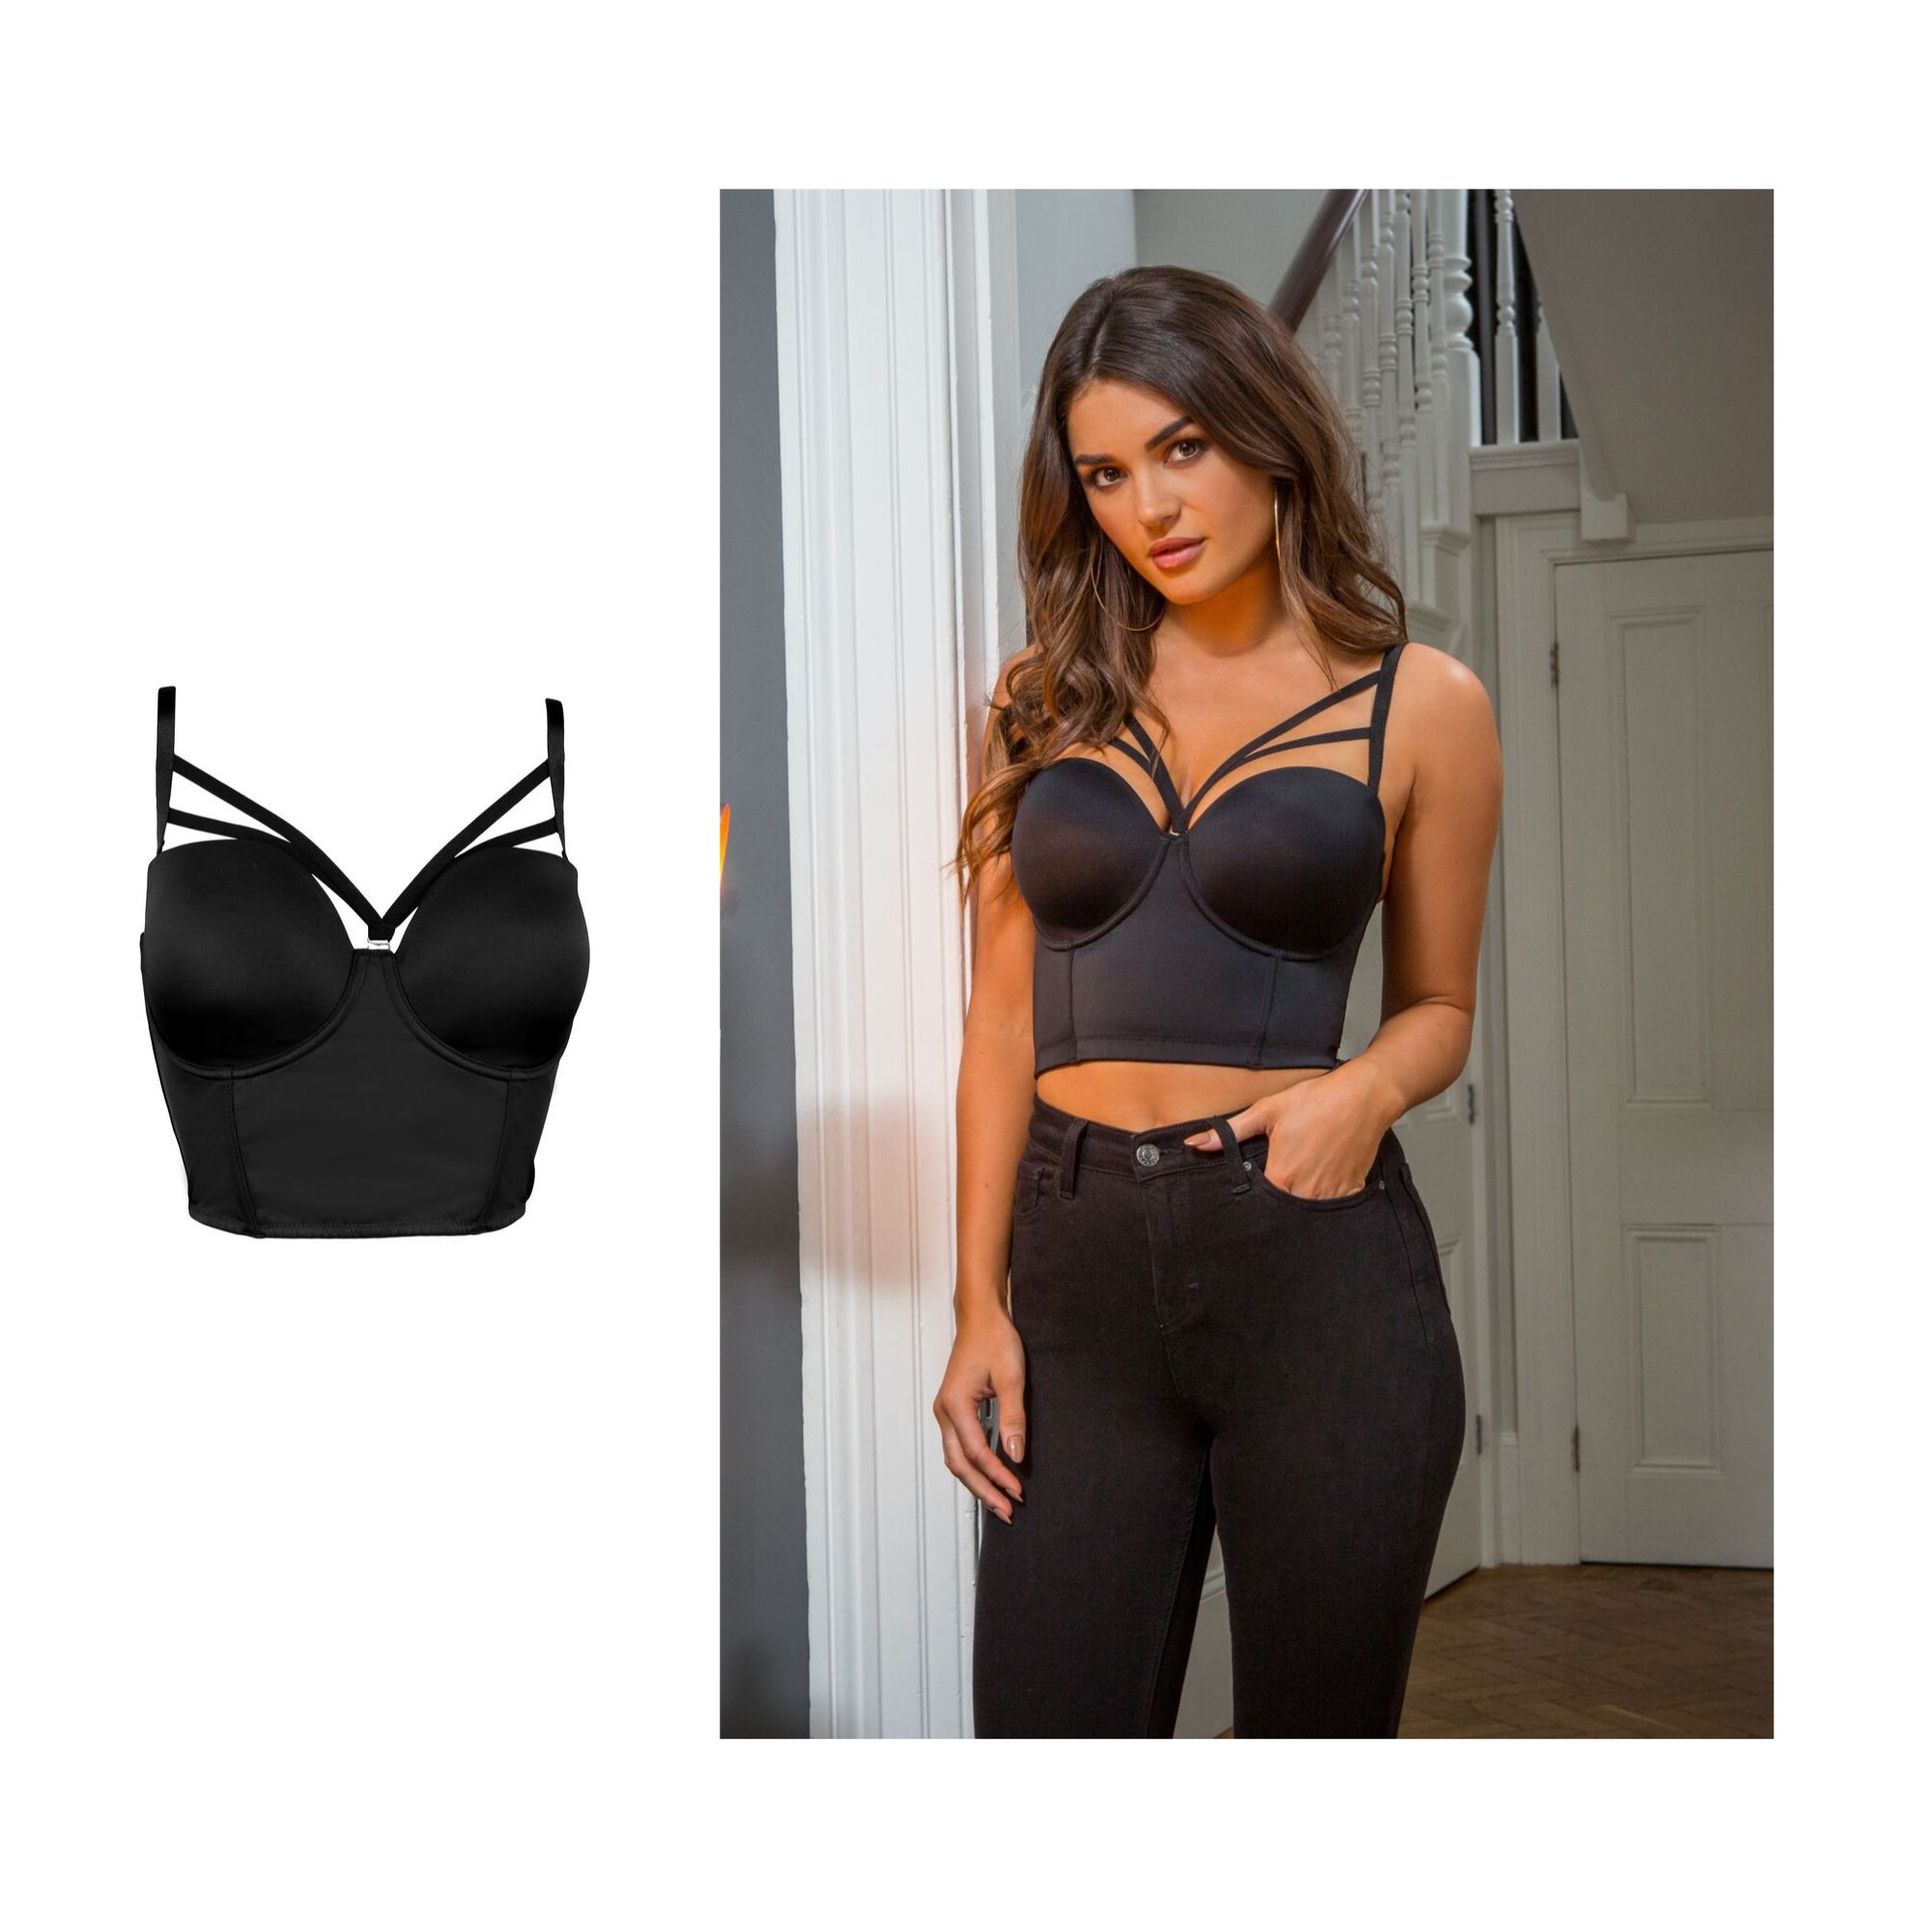 SKIMS - The Mesh Strapless Bra is the ideal strapless styling solution  featuring fully convertible, detachable straps that allow for strapless,  racer back, halter, one shoulder and wide strap options. Available in